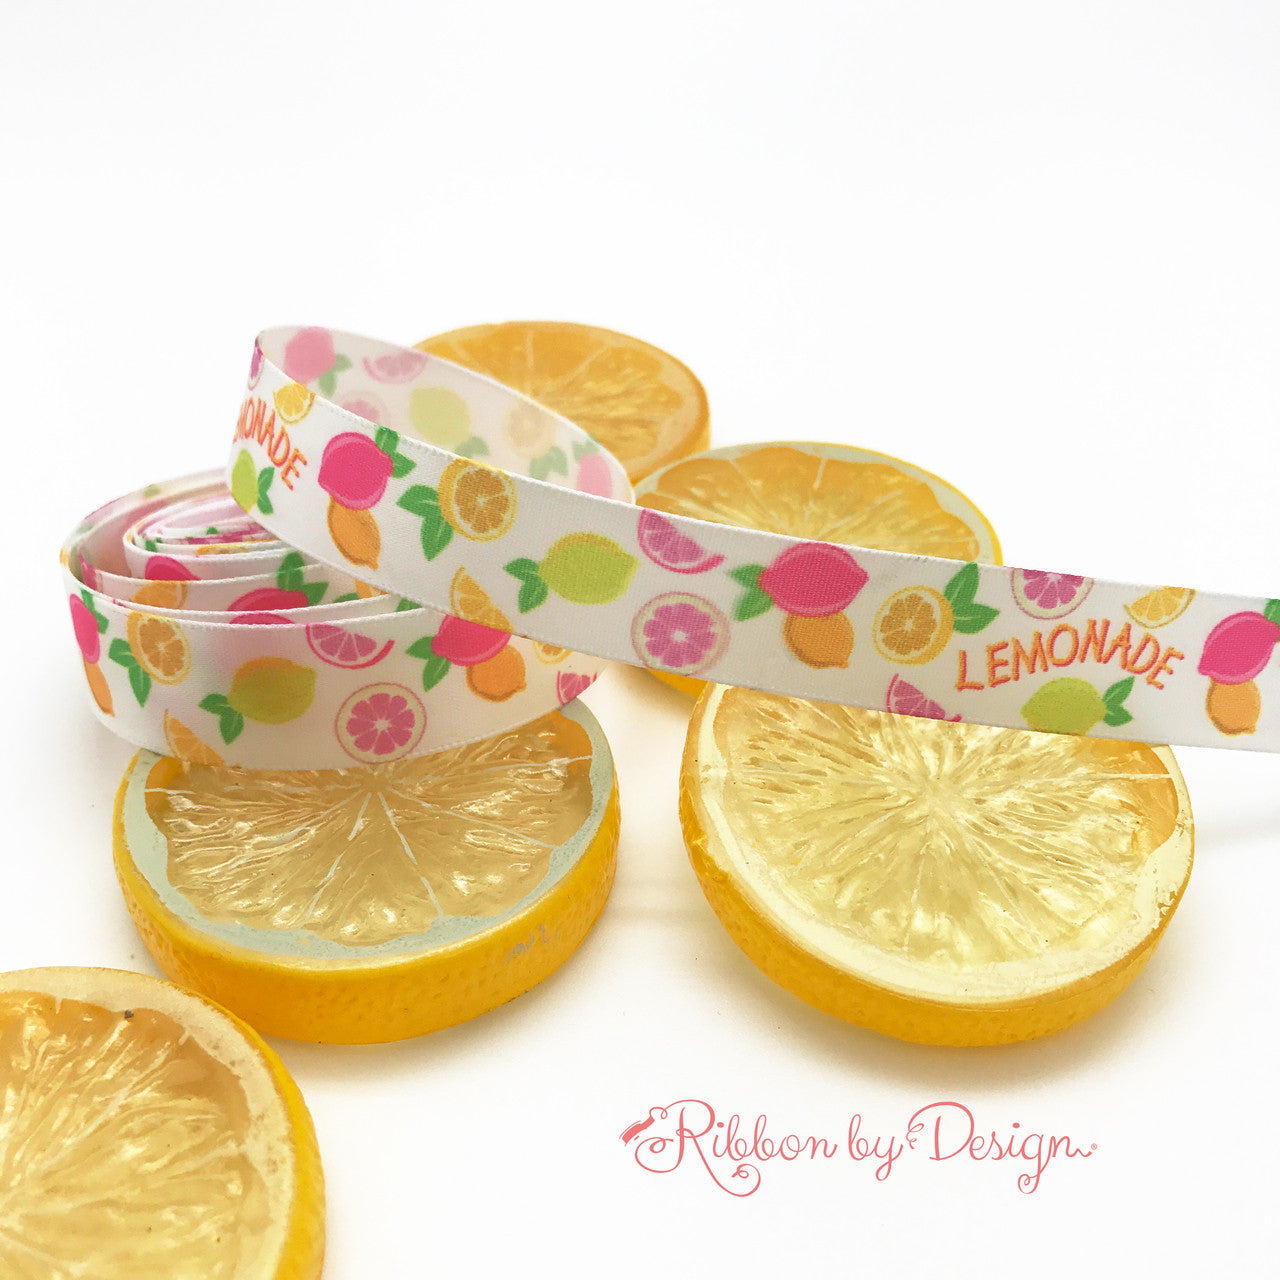 Our lemonade ribbon will add sparkle to your Summer soirees!
Designed and printed in the USA